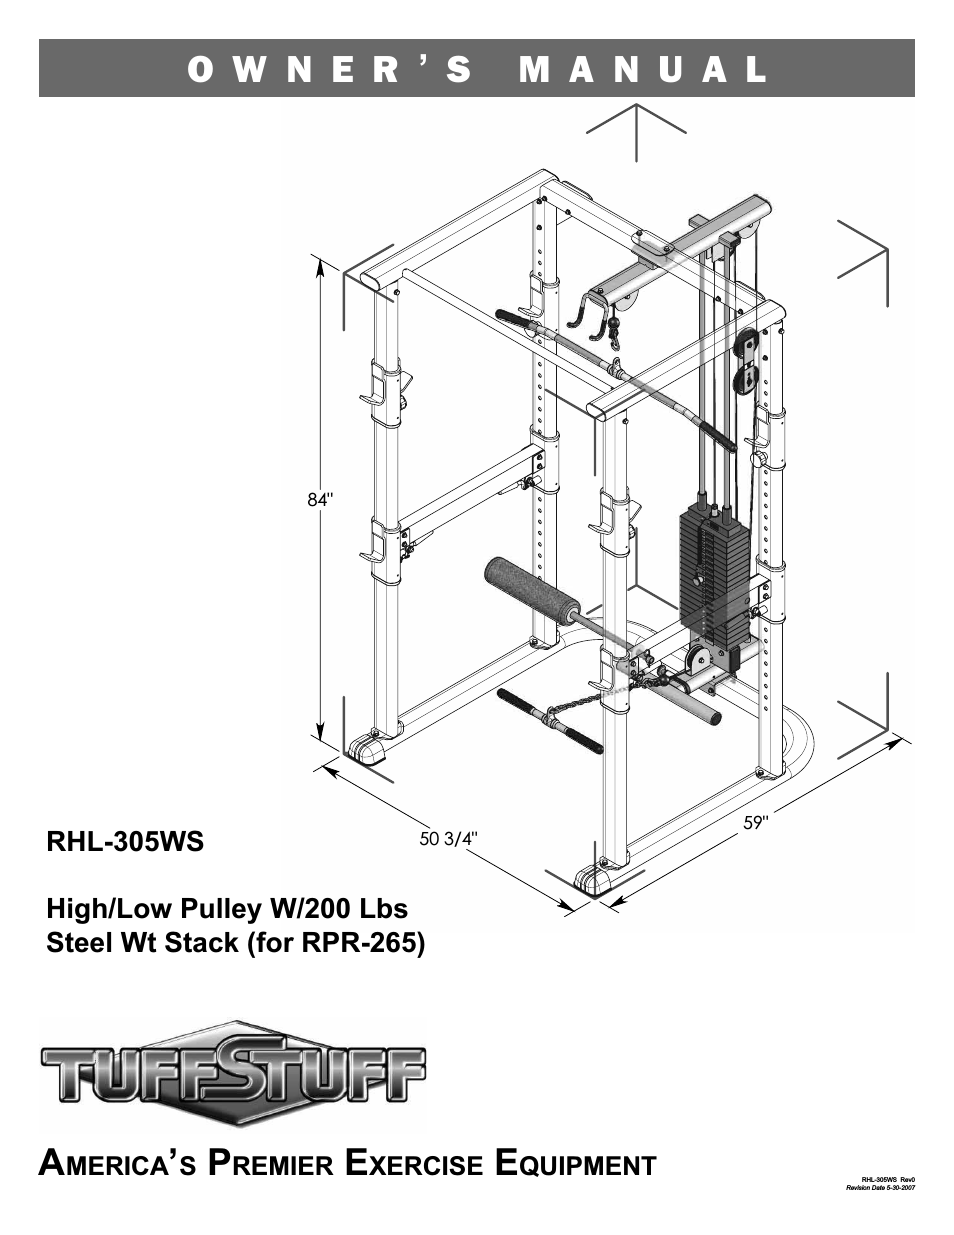 RHL-305WS High/Low Pulley W/200 lbs. Steel Wt Stack